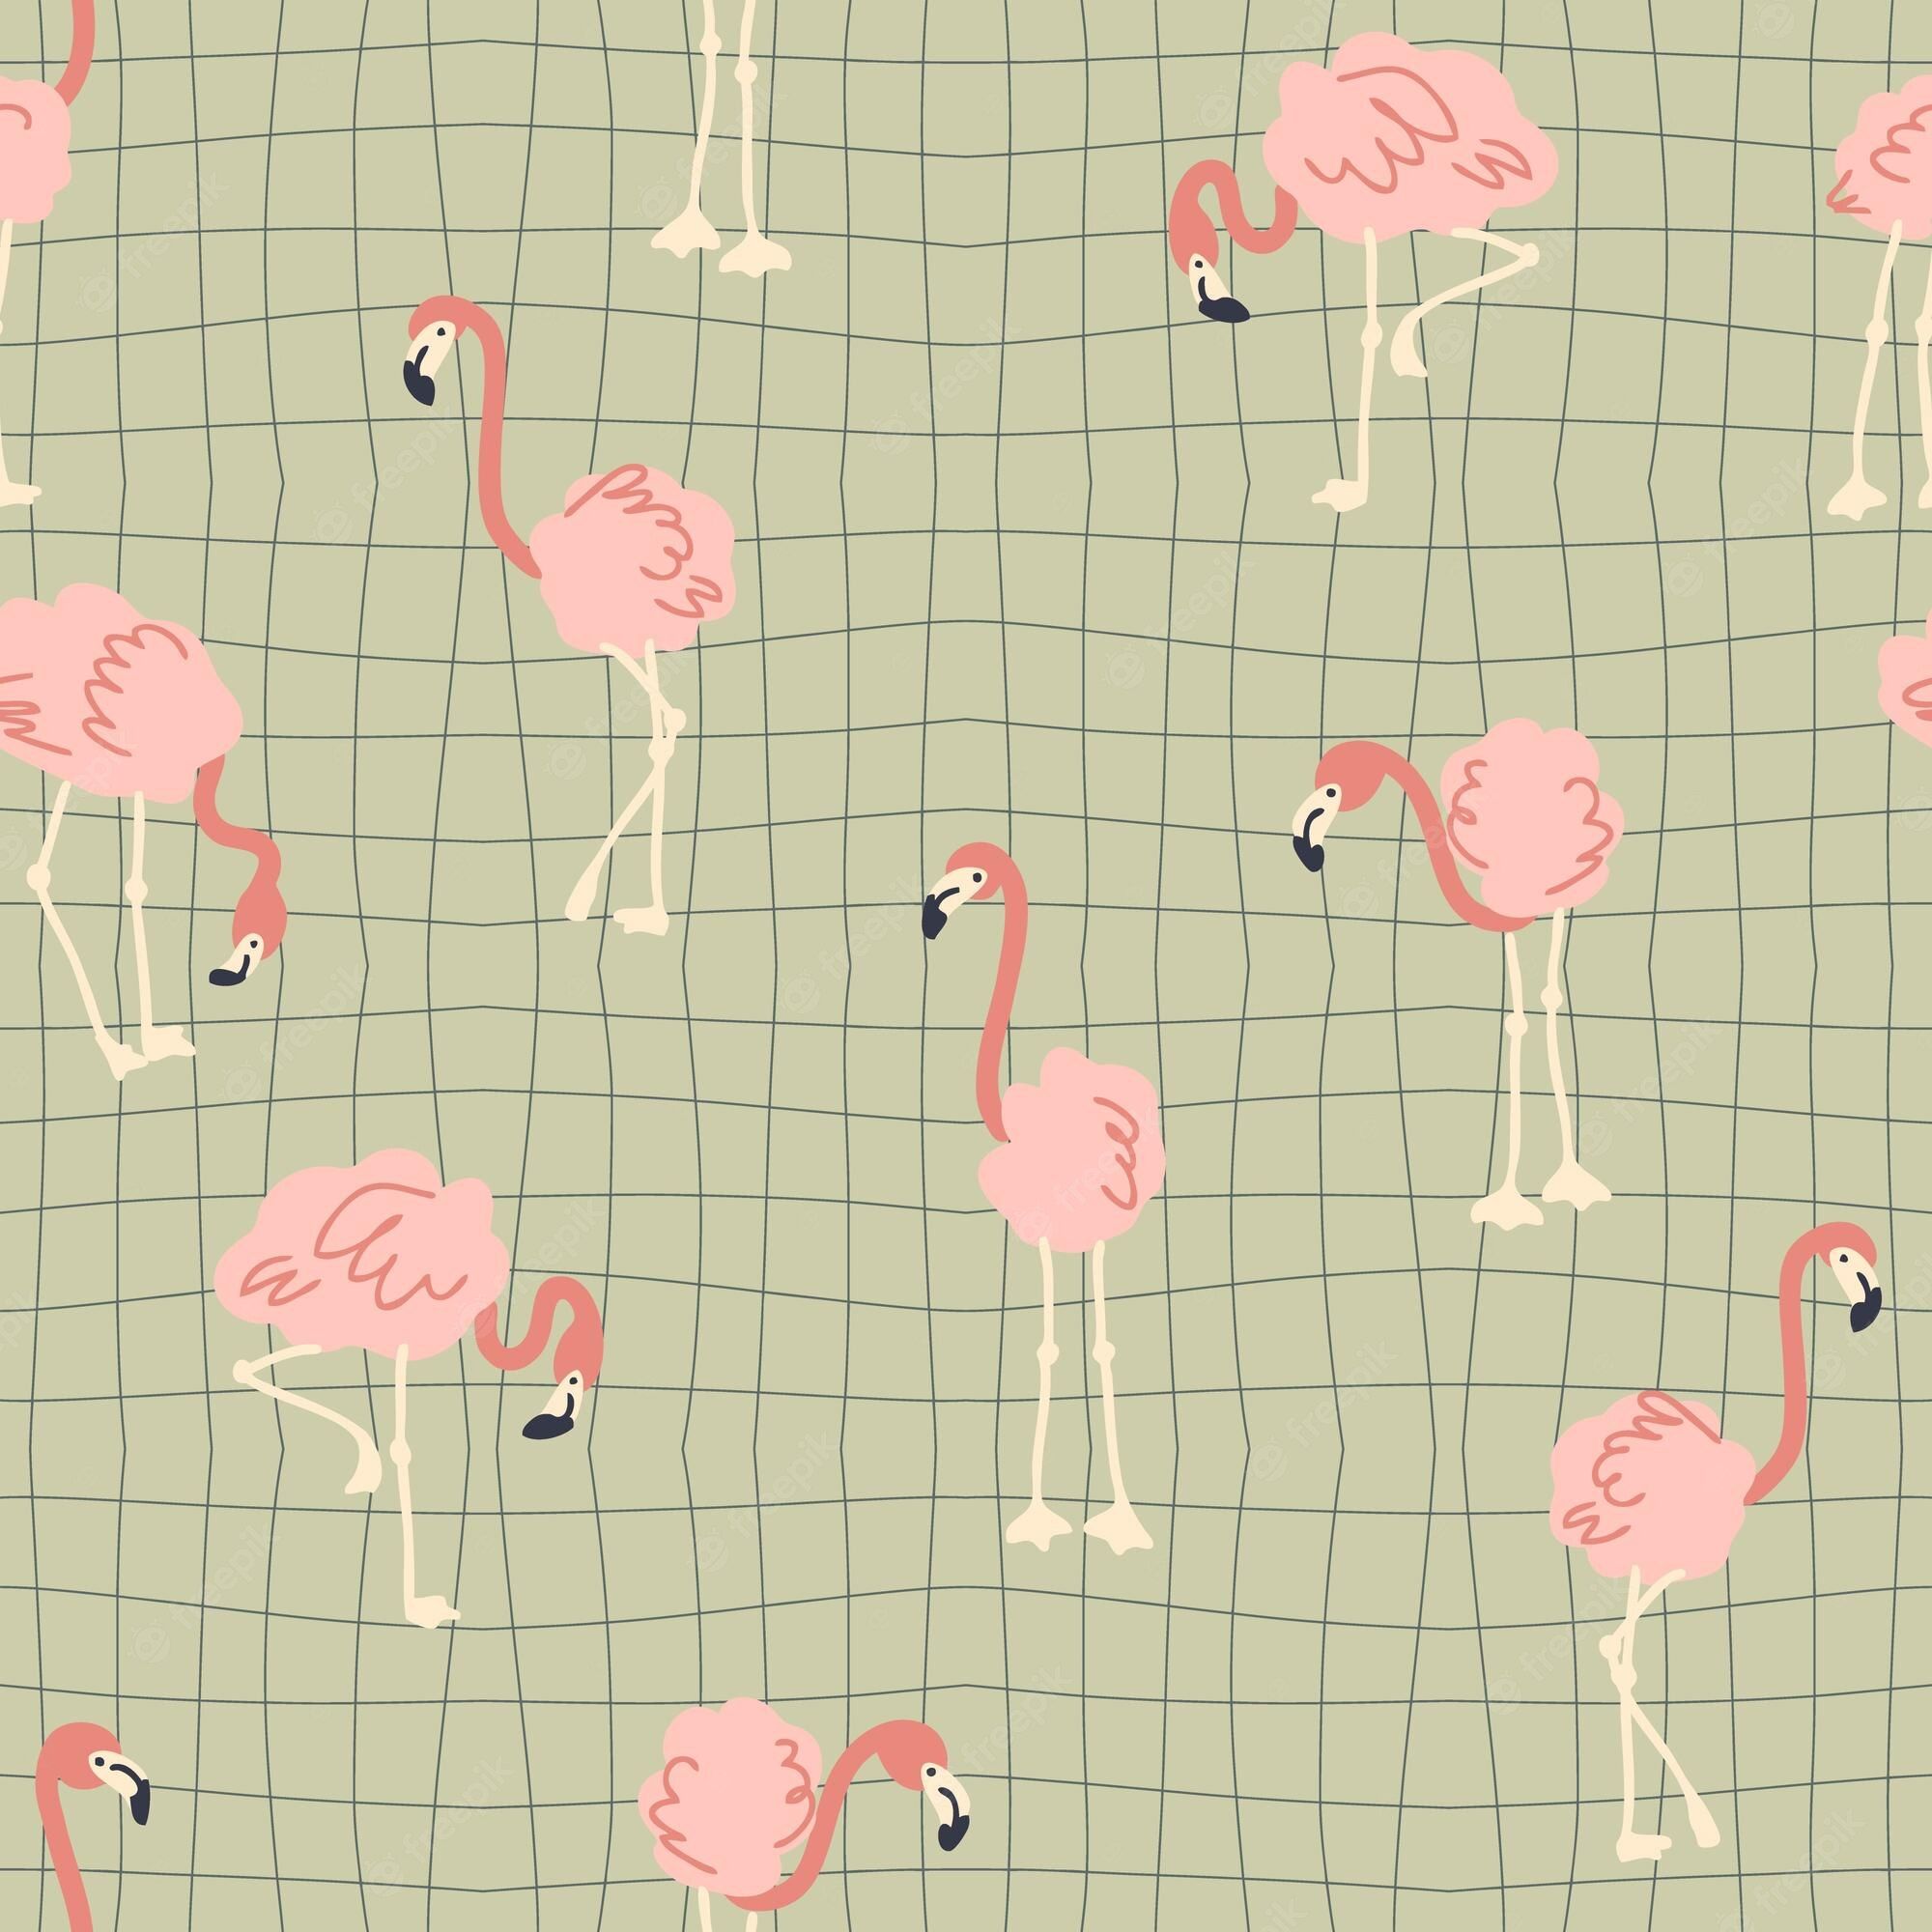 Premium Vector. Groovy seamless pattern with flamingo on grid distorted background hippie aesthetic print for fabric paper tshirt doodle vector illustration for decor and design